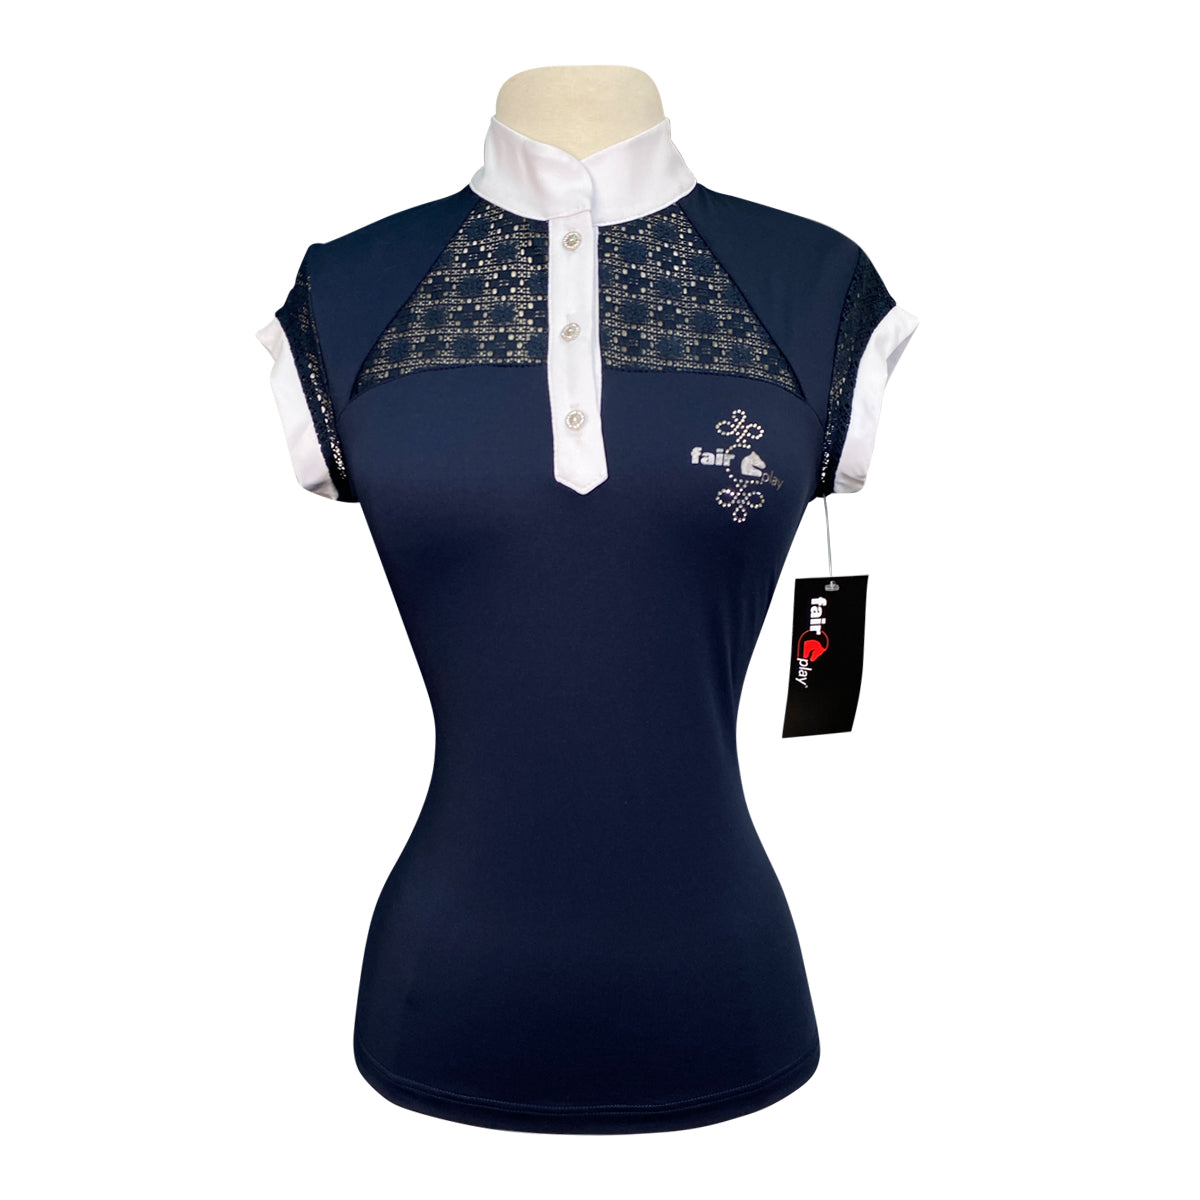 Fair Play 'Aiko' Competition Shirt in Navy